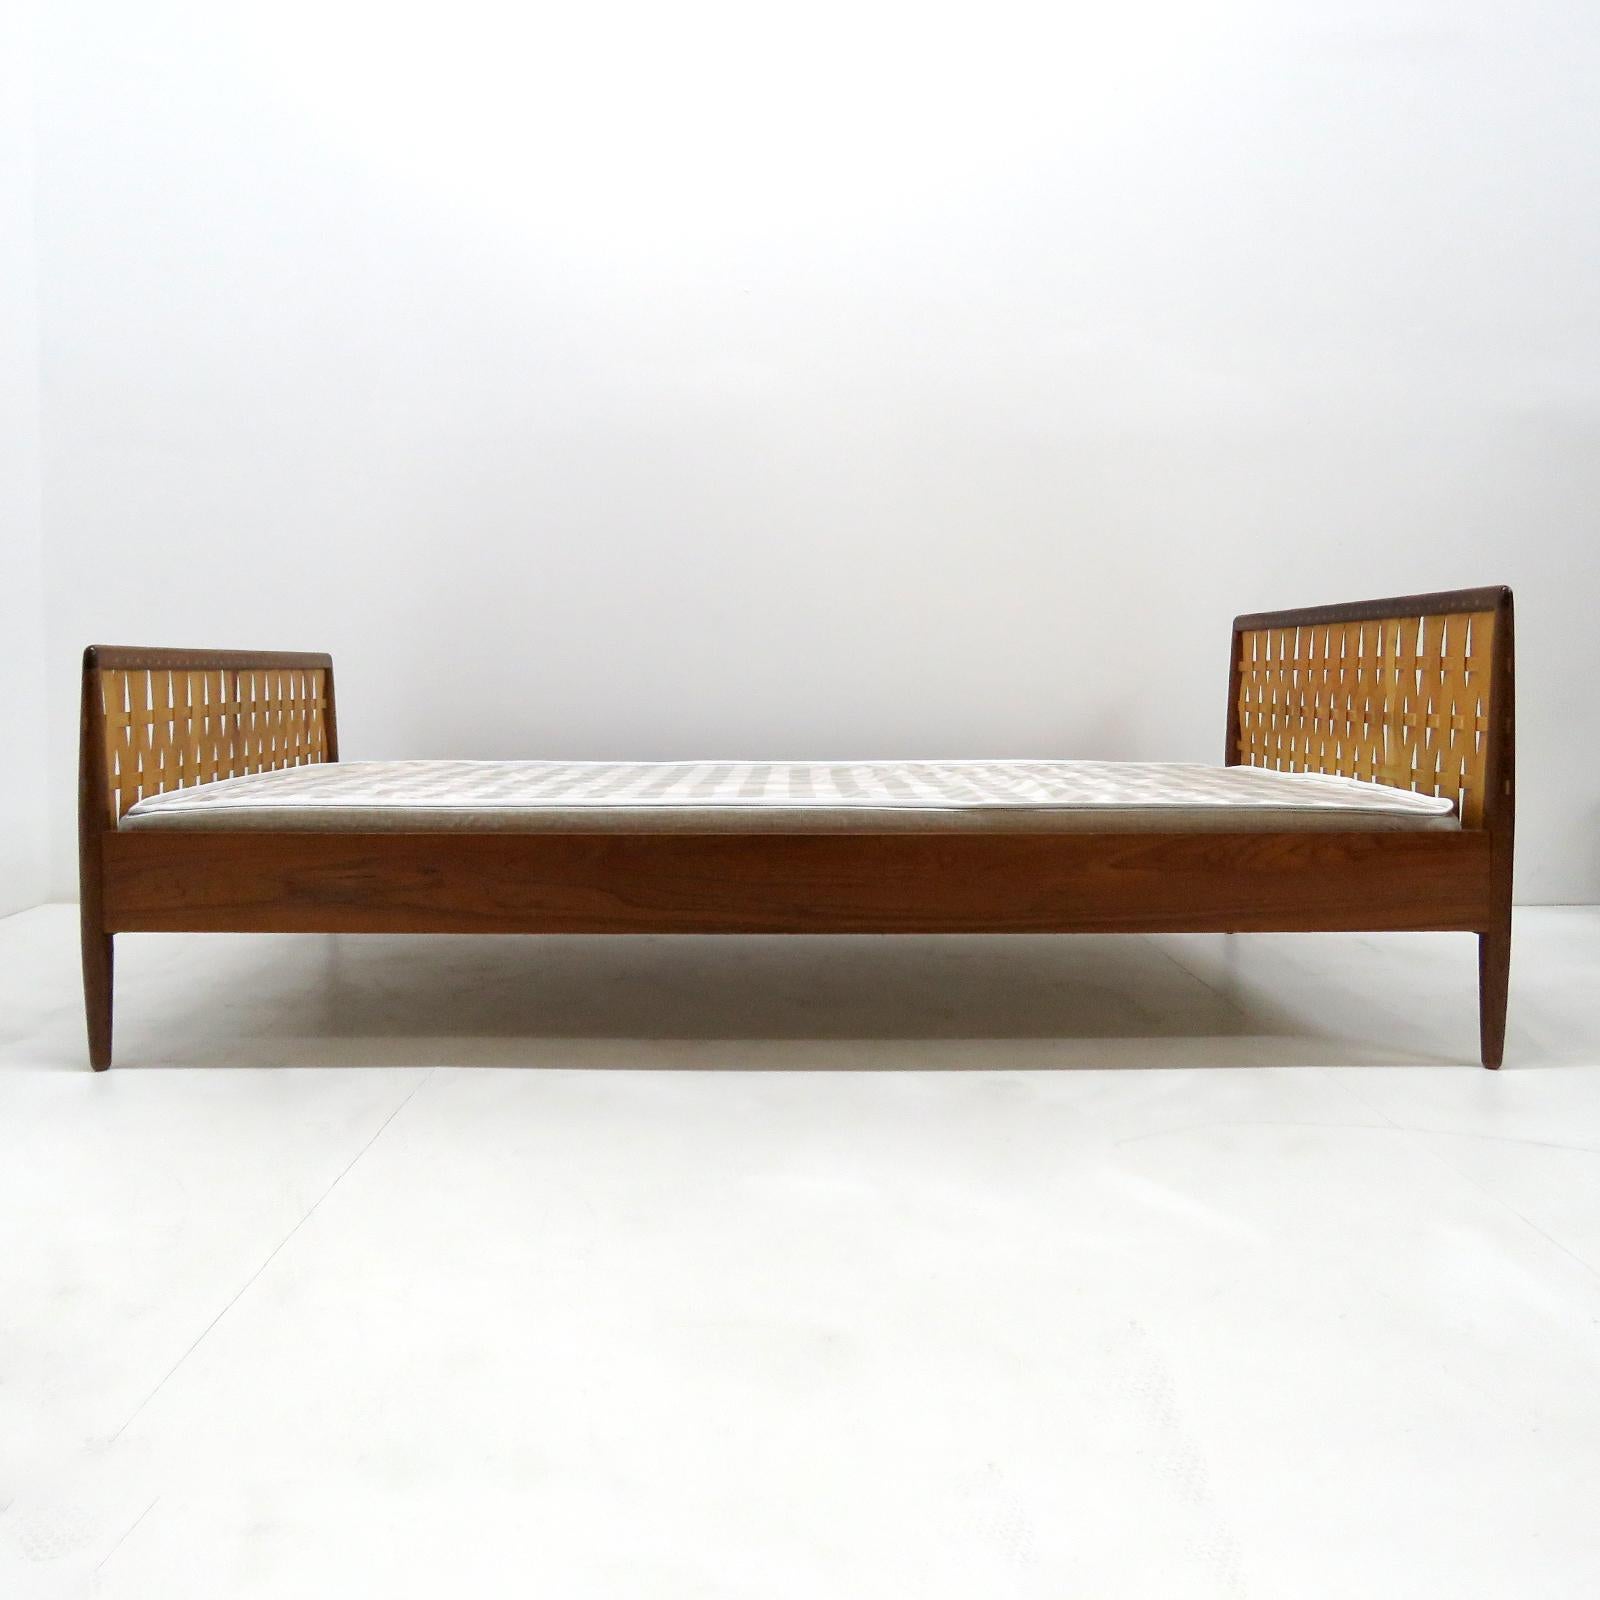 Wonderful daybed by Illums Bolighus in teak with woven wood headboard and metal spring frame, new European size mattress available upon request, marked.